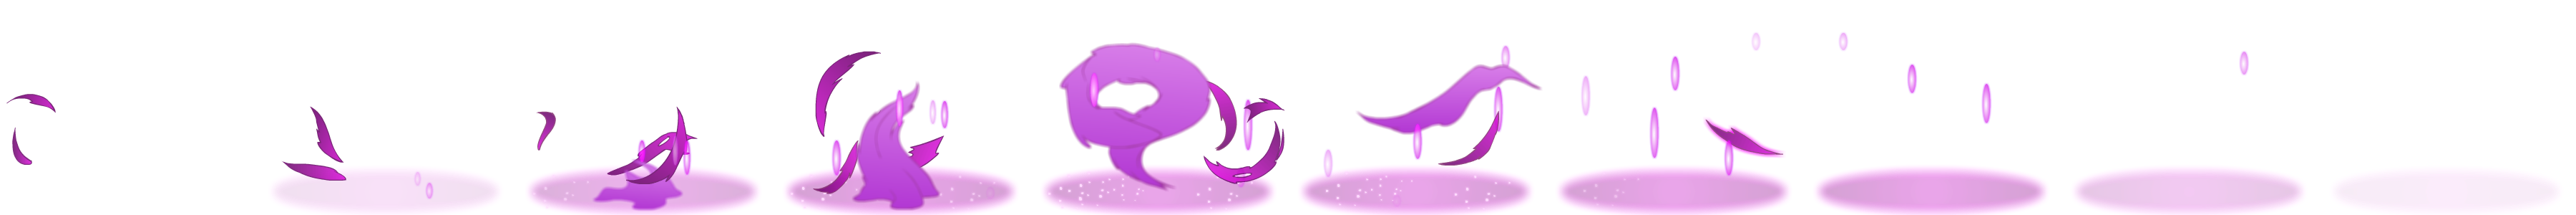 https://images.neopets.com/dome/items/ranged/swirly_shadow_magic.png